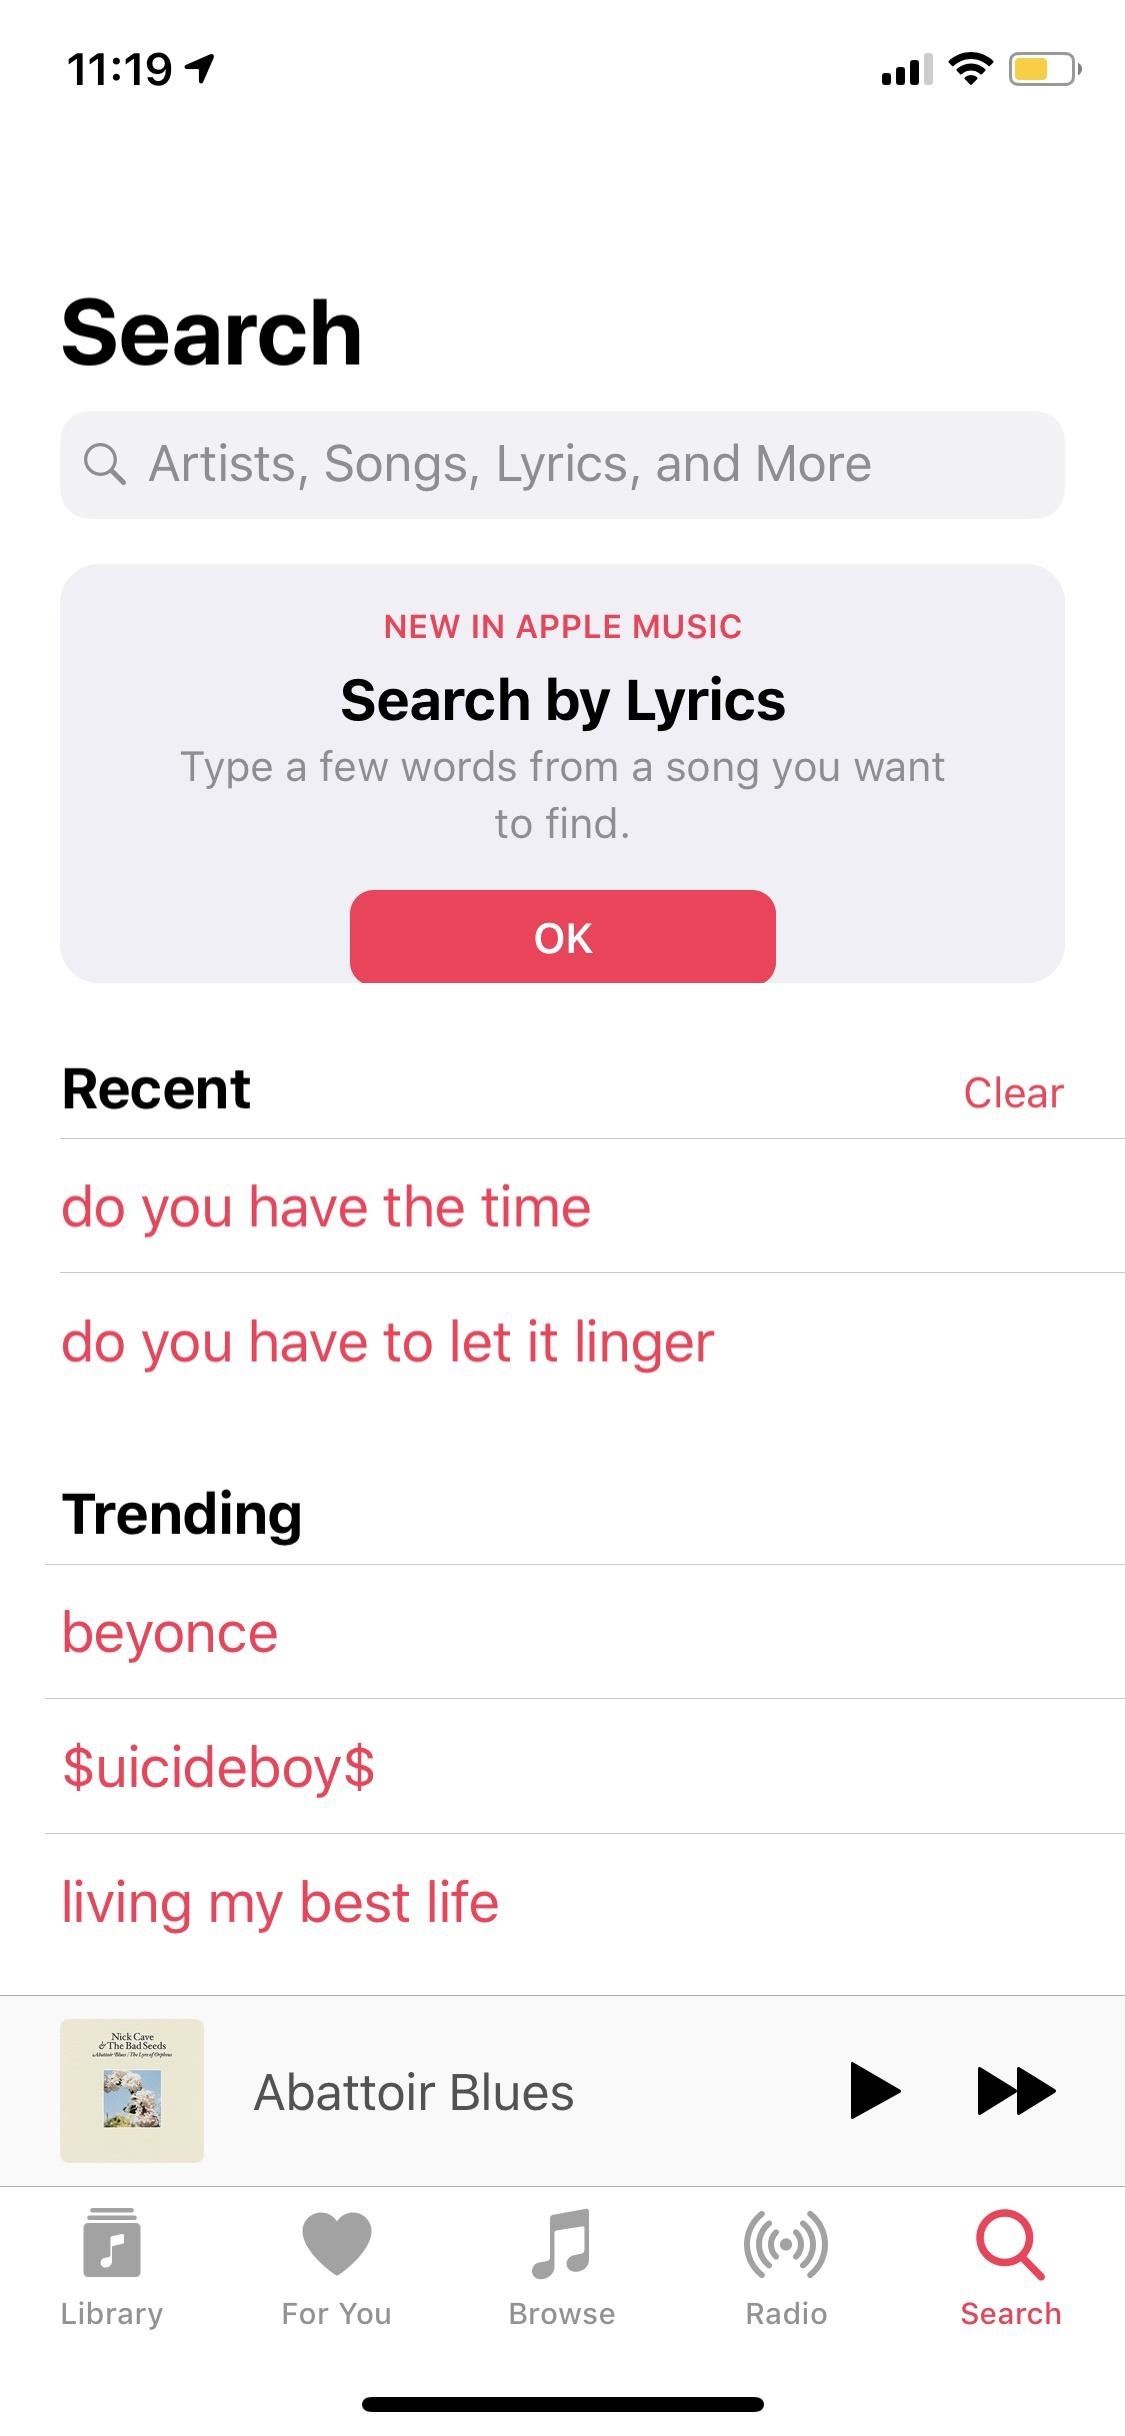 How to Find Songs by Lyrics in Apple Music for iOS 12 — With or Without a Subscription